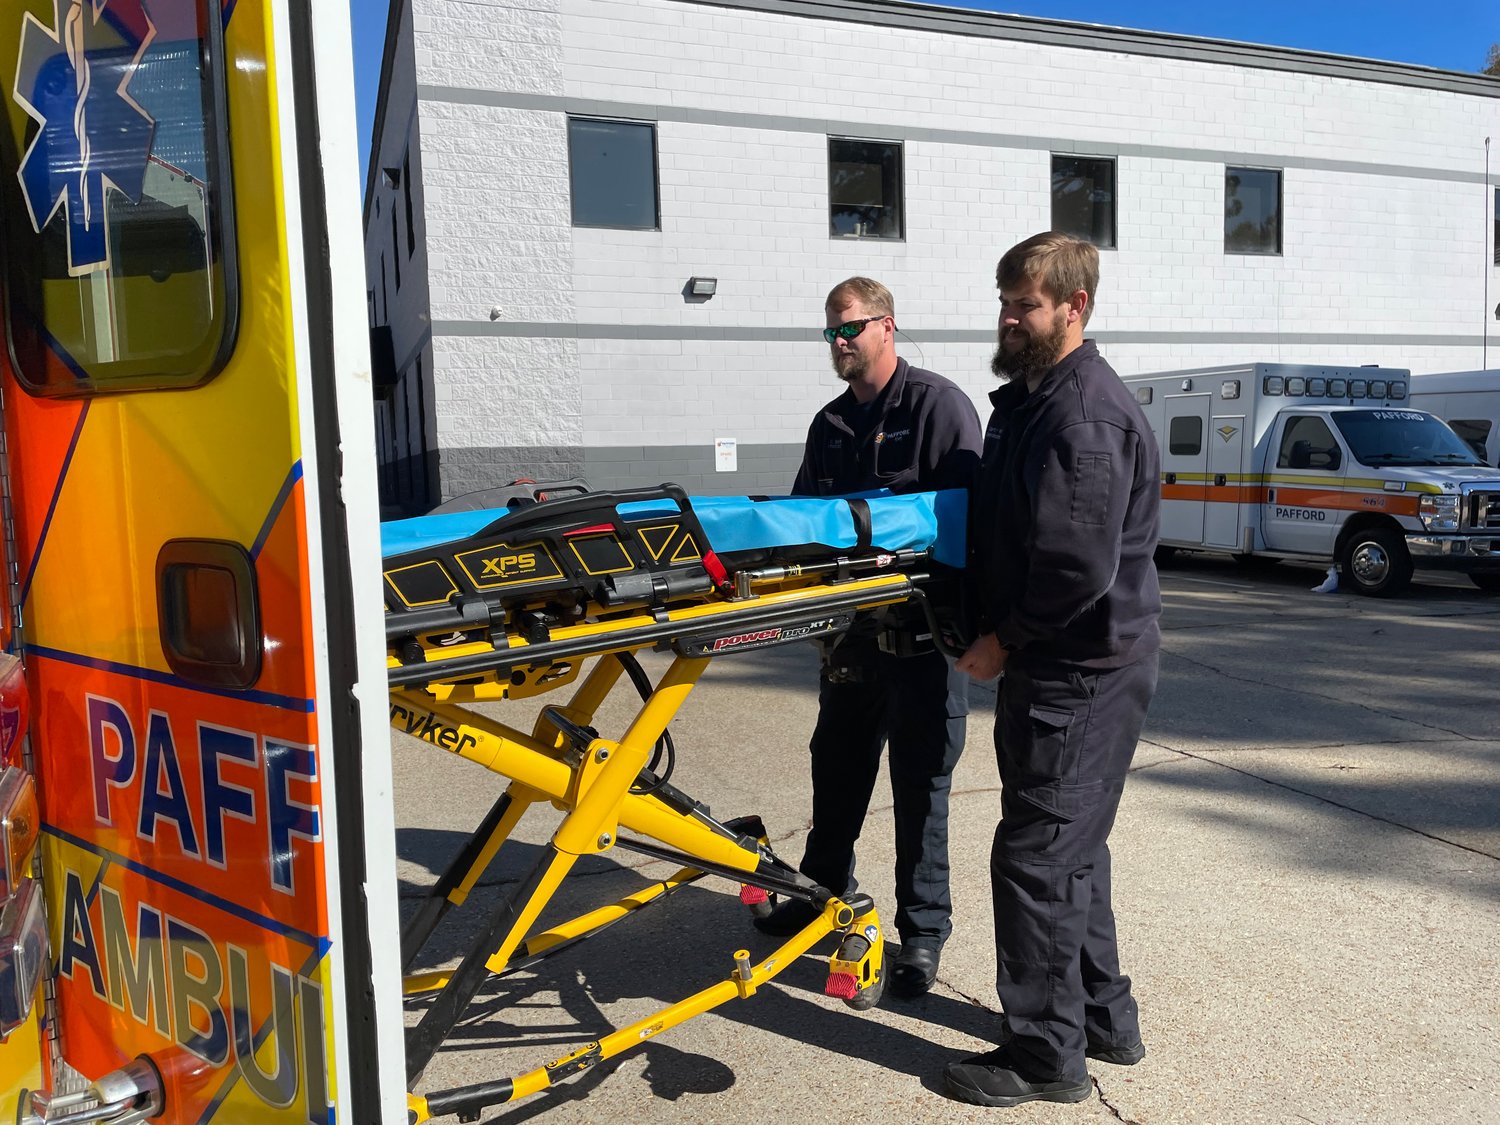 Pafford EMS Logistics Manager and Advanced EMT Chris Bain and Operation Manager and Paramedic Curtis Weldon prepare to go on a call. Ambulance providers throughout the state have been impacted by COVID-19.